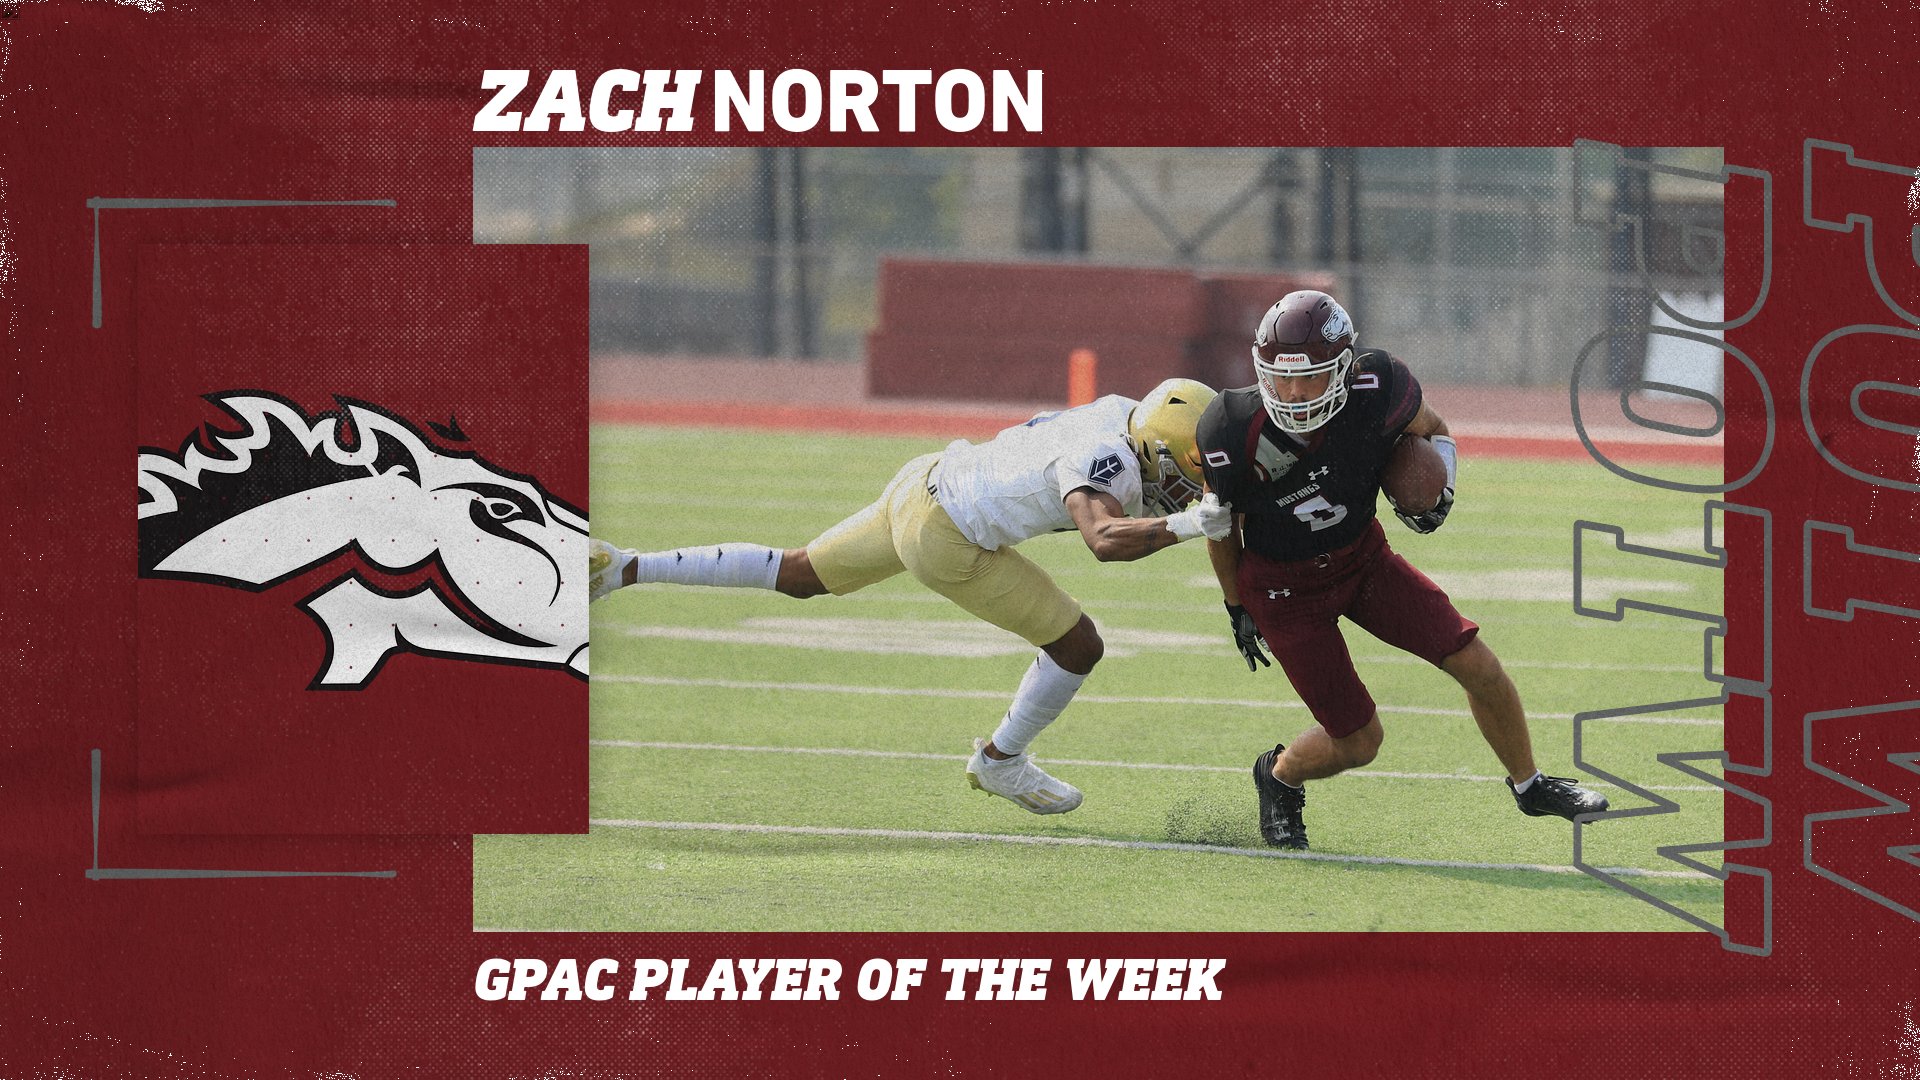 Norton named GPAC Offensive Player of the Week